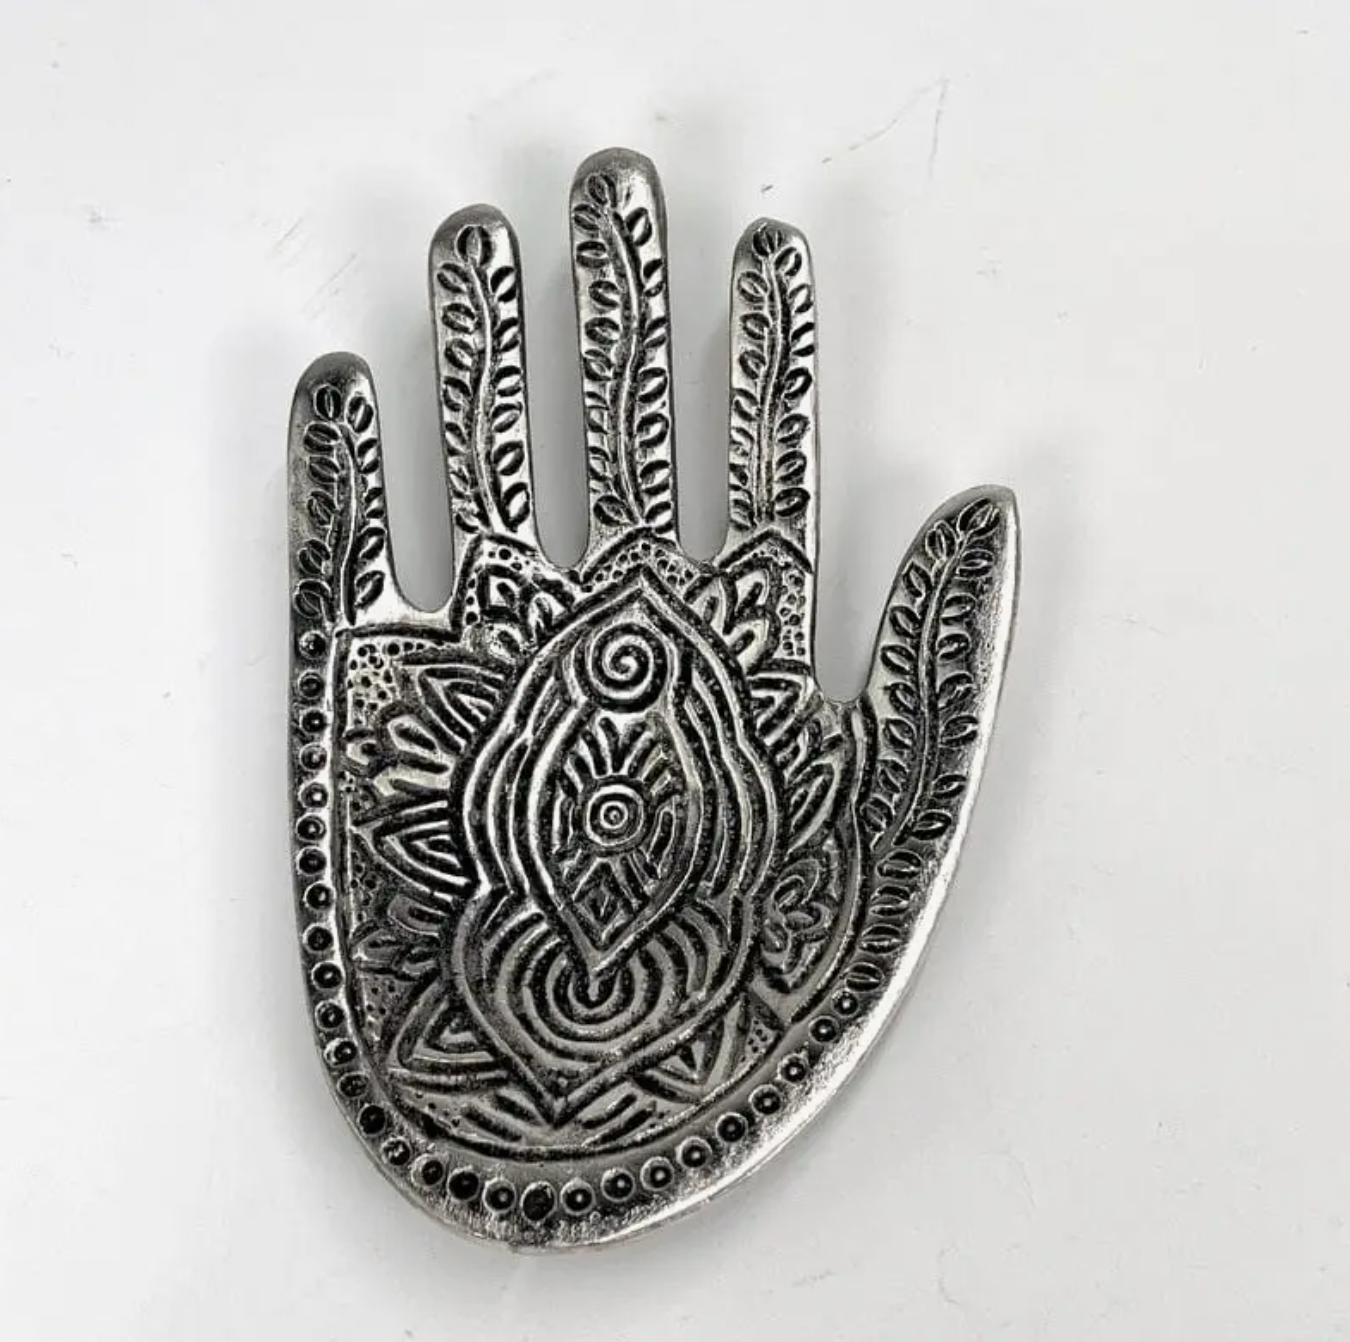 Hand Incense Holder - Silver or Gold